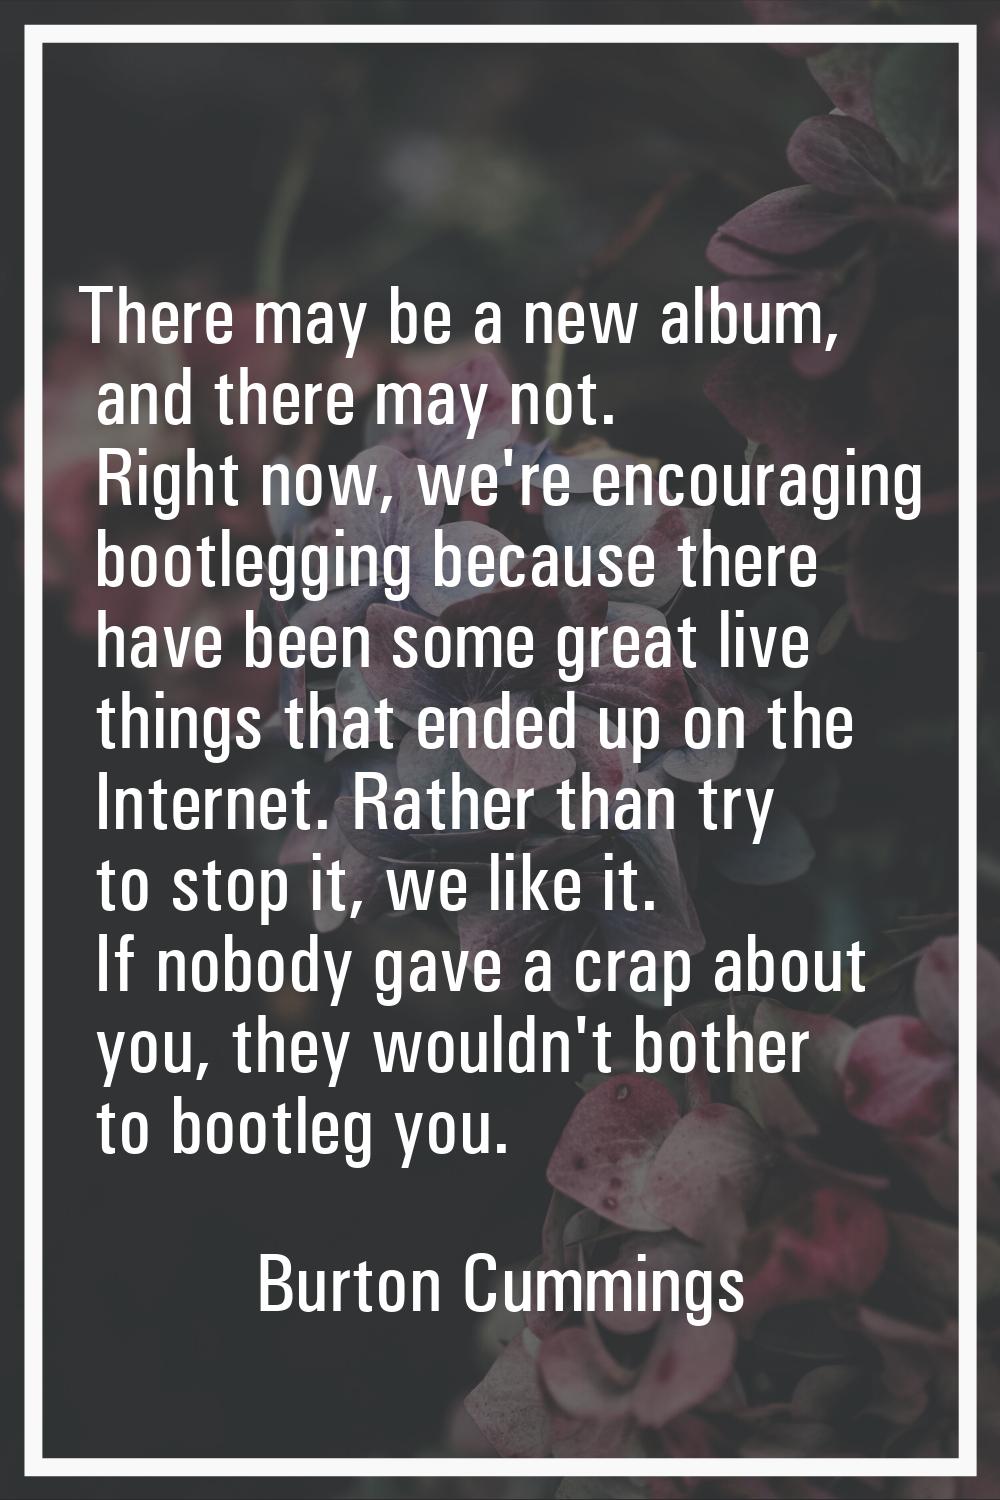 There may be a new album, and there may not. Right now, we're encouraging bootlegging because there